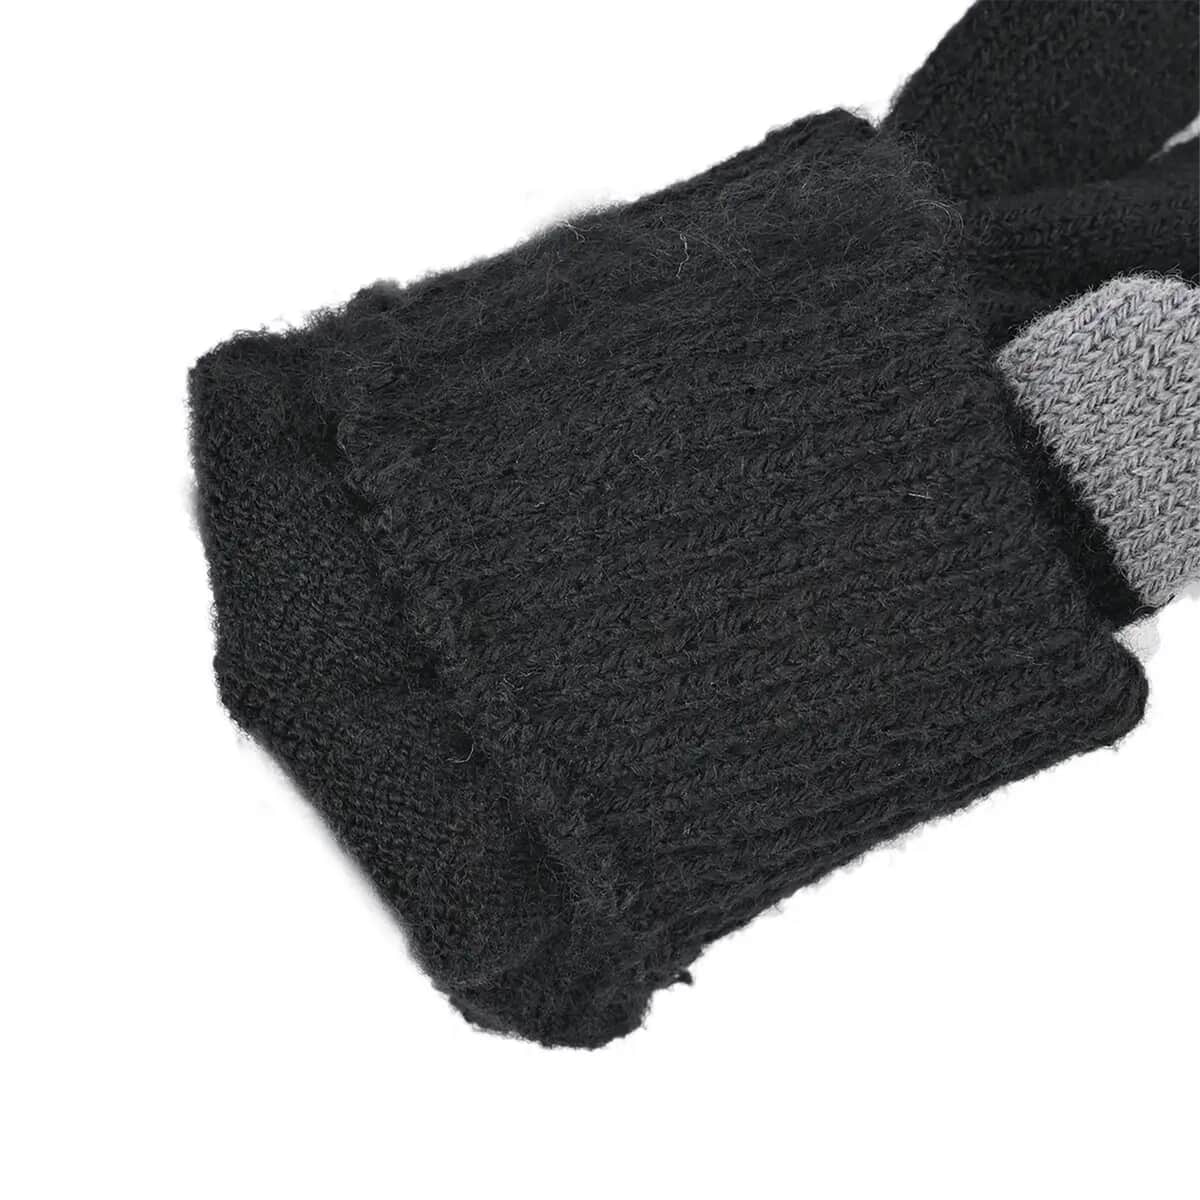 Black 100% Acrylic 3pcs Set Glove (8.66), Scarf (9.85x8.66) and Hat (10.24x9.05) image number 6